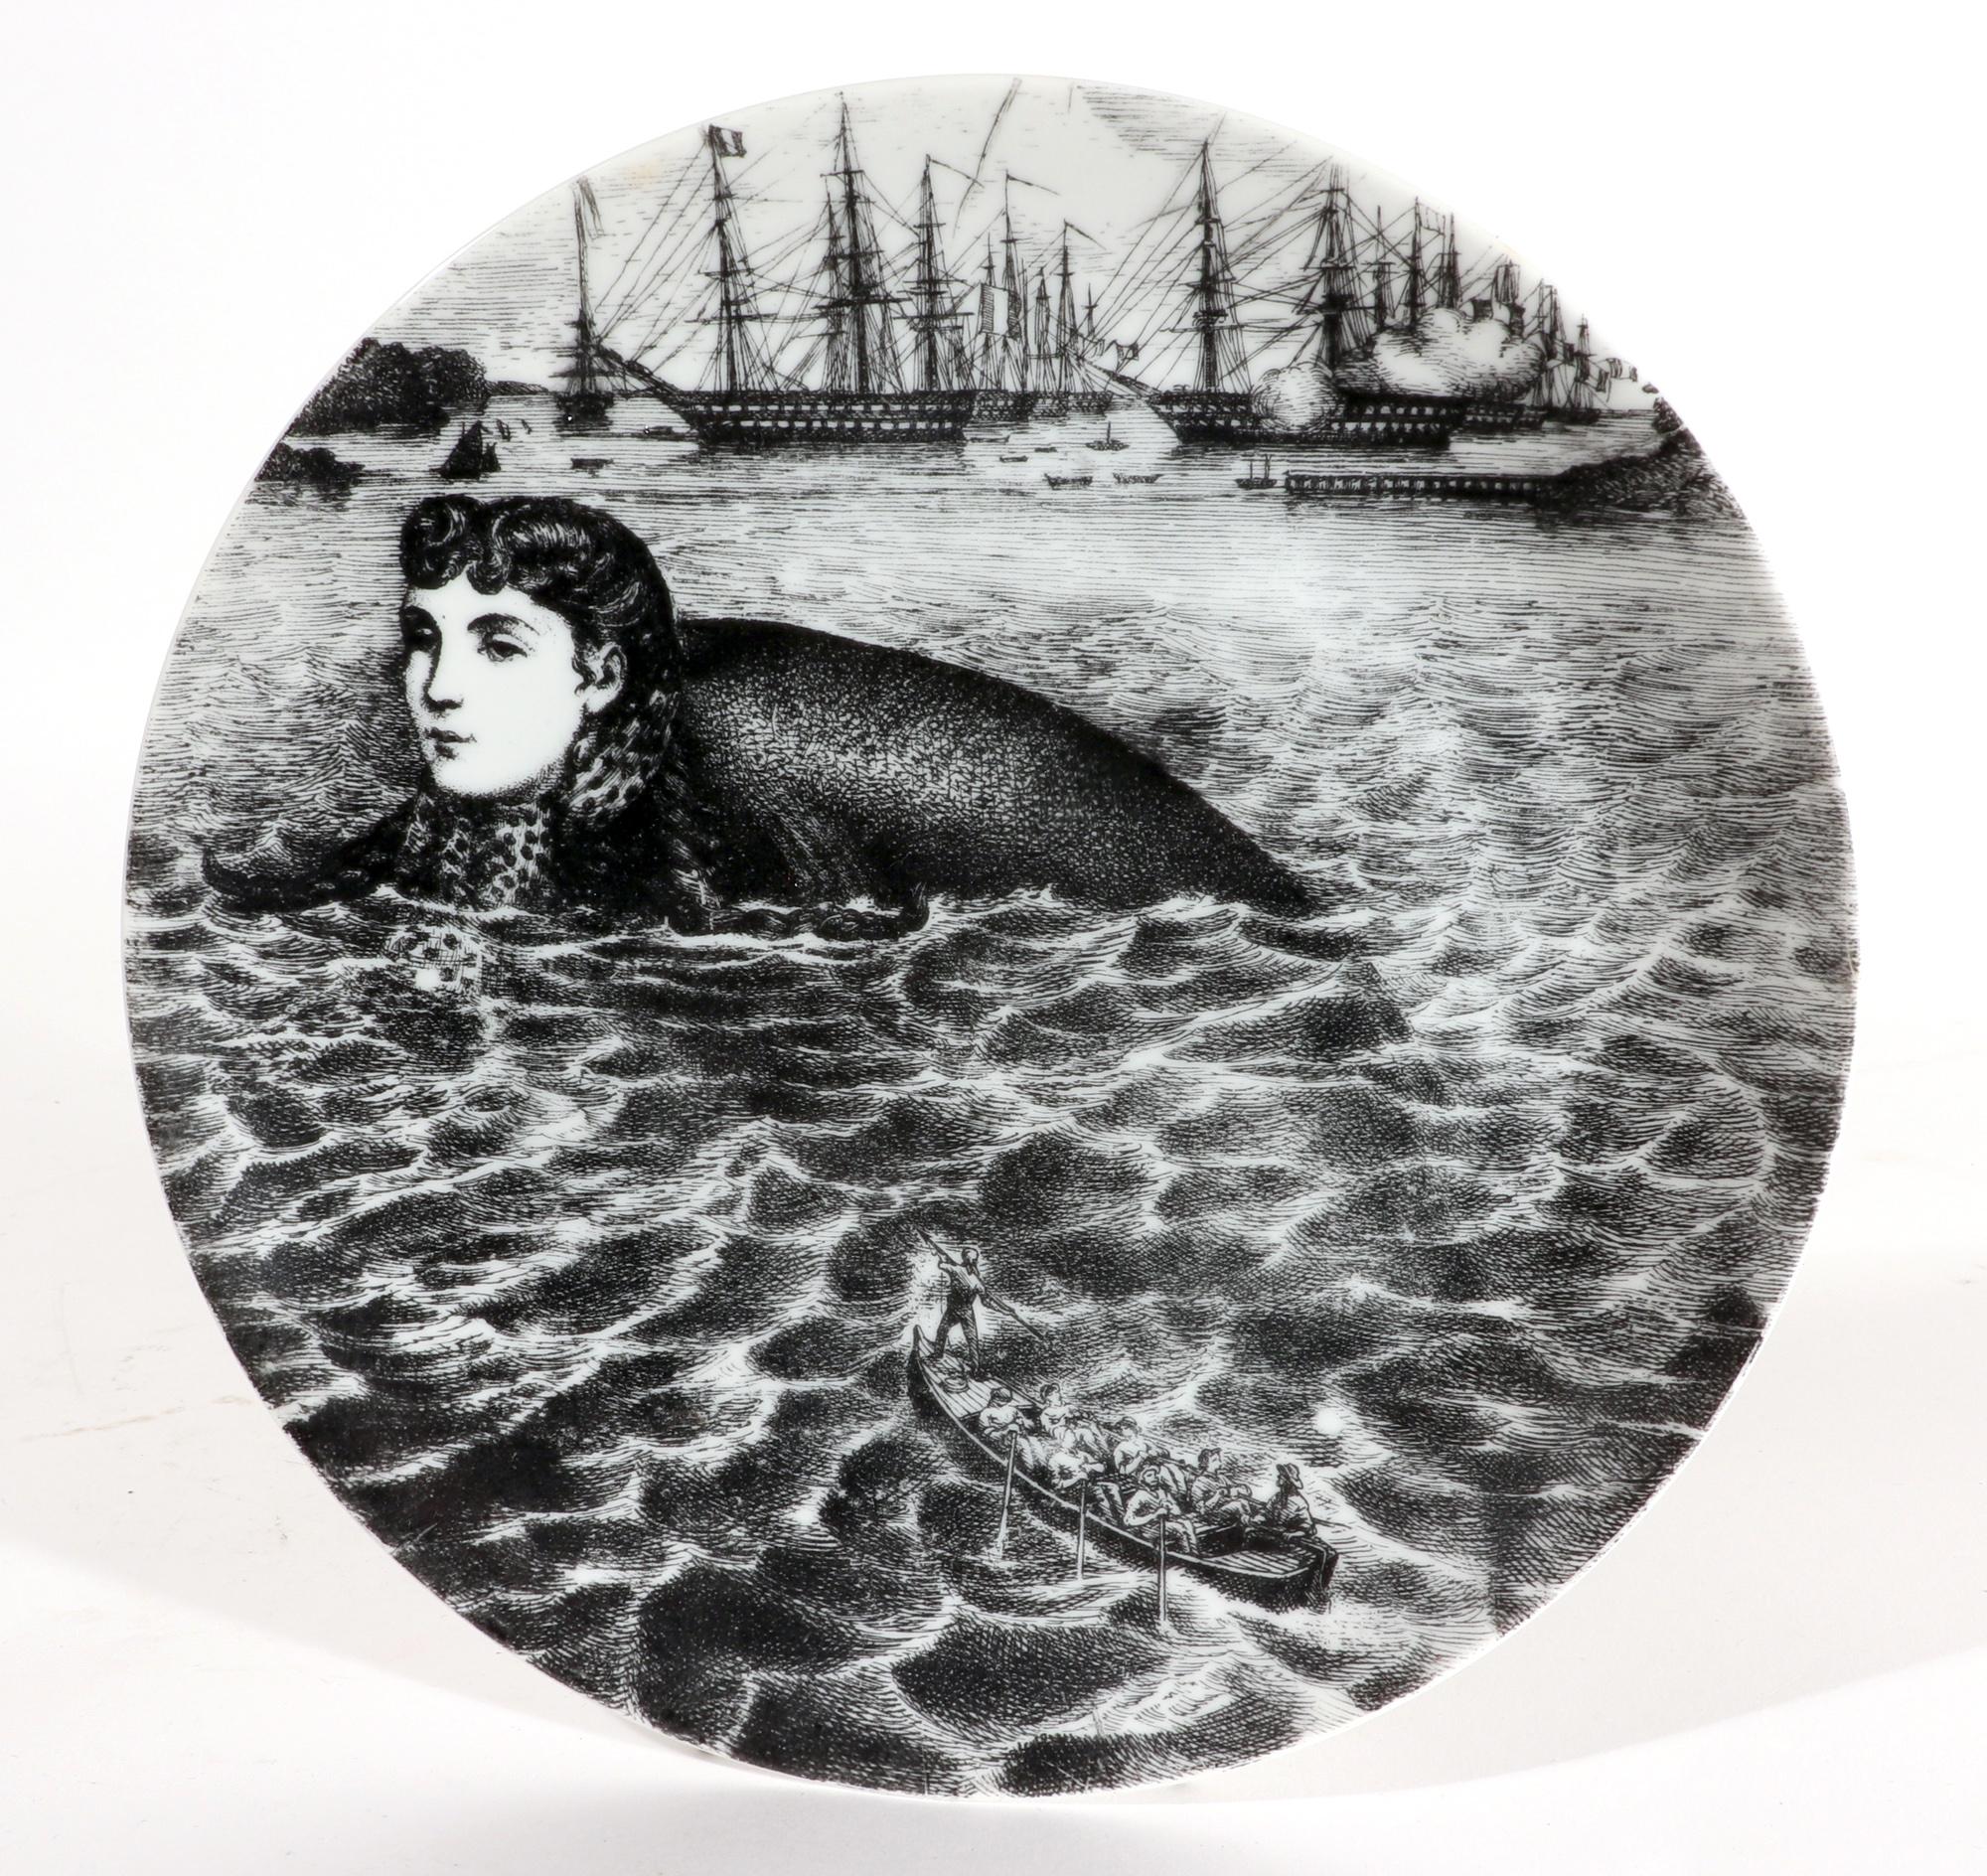 Piero Fornasetti Porcelain Plate, 
Sirene Pattern (Sirens), #2,
Early 1950s

The Piero Fornasetti black and white plate from the early and rare Sirens pattern. This depicts a giant sea creature with a female head amongst waves. In the background